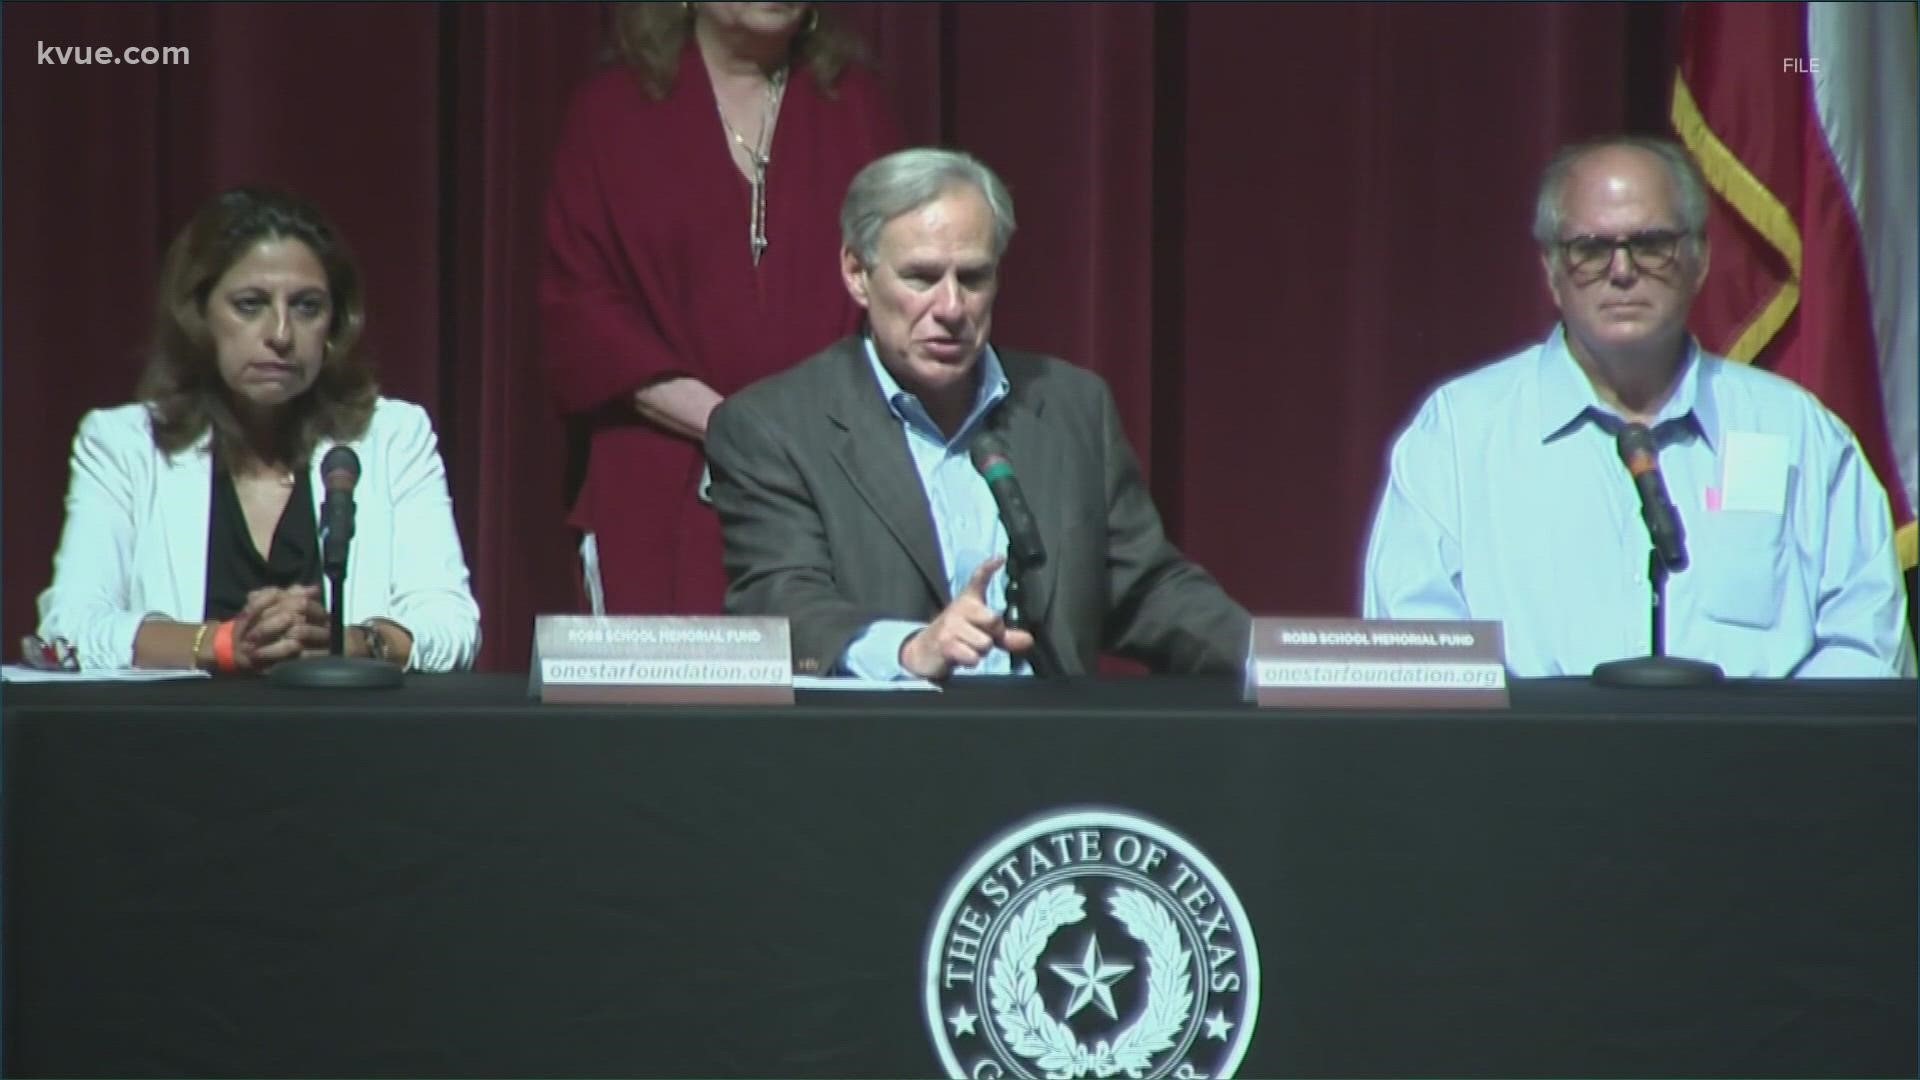 Gov. Greg Abbott is asking for special legislative committees to look at ways to protect Texans in the wake of the shooting at Robb Elementary.